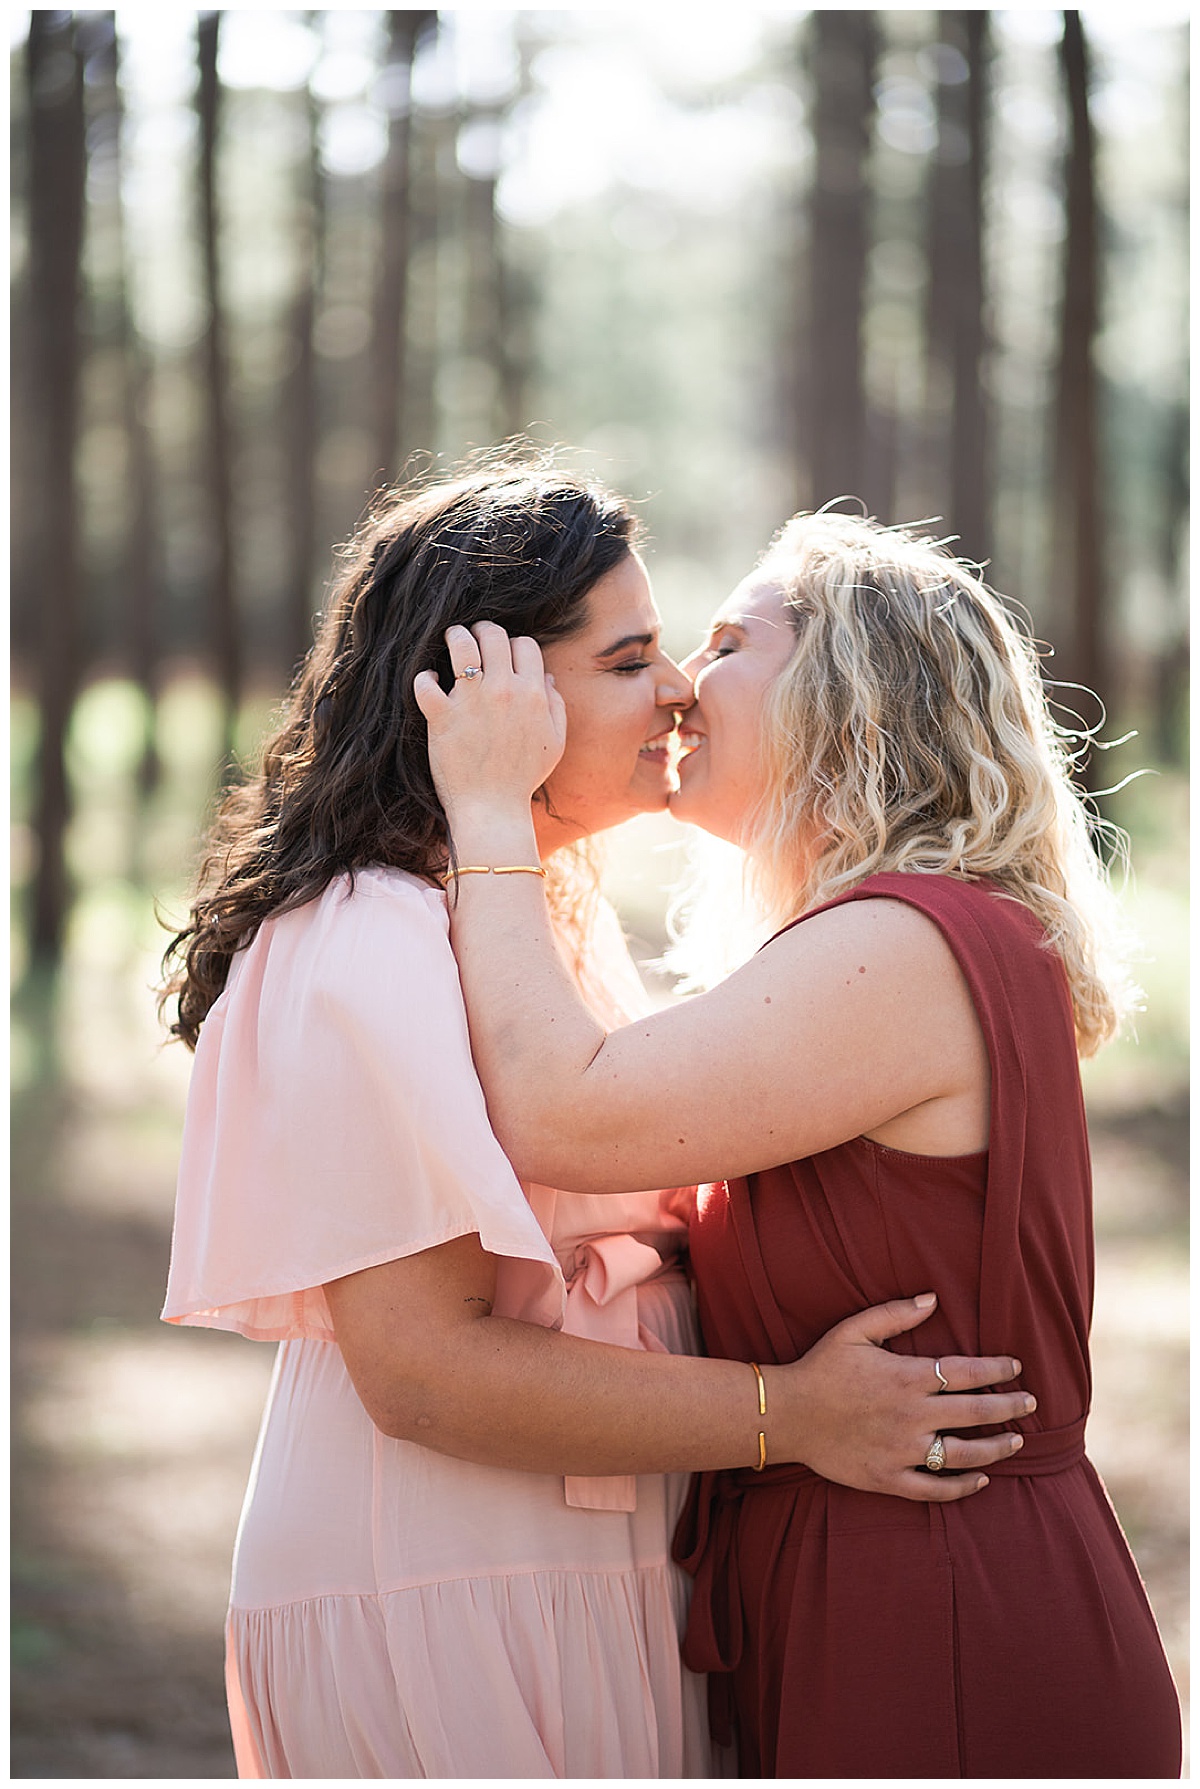 Couple share a passionate kiss for WG Jones Park Engagement Session